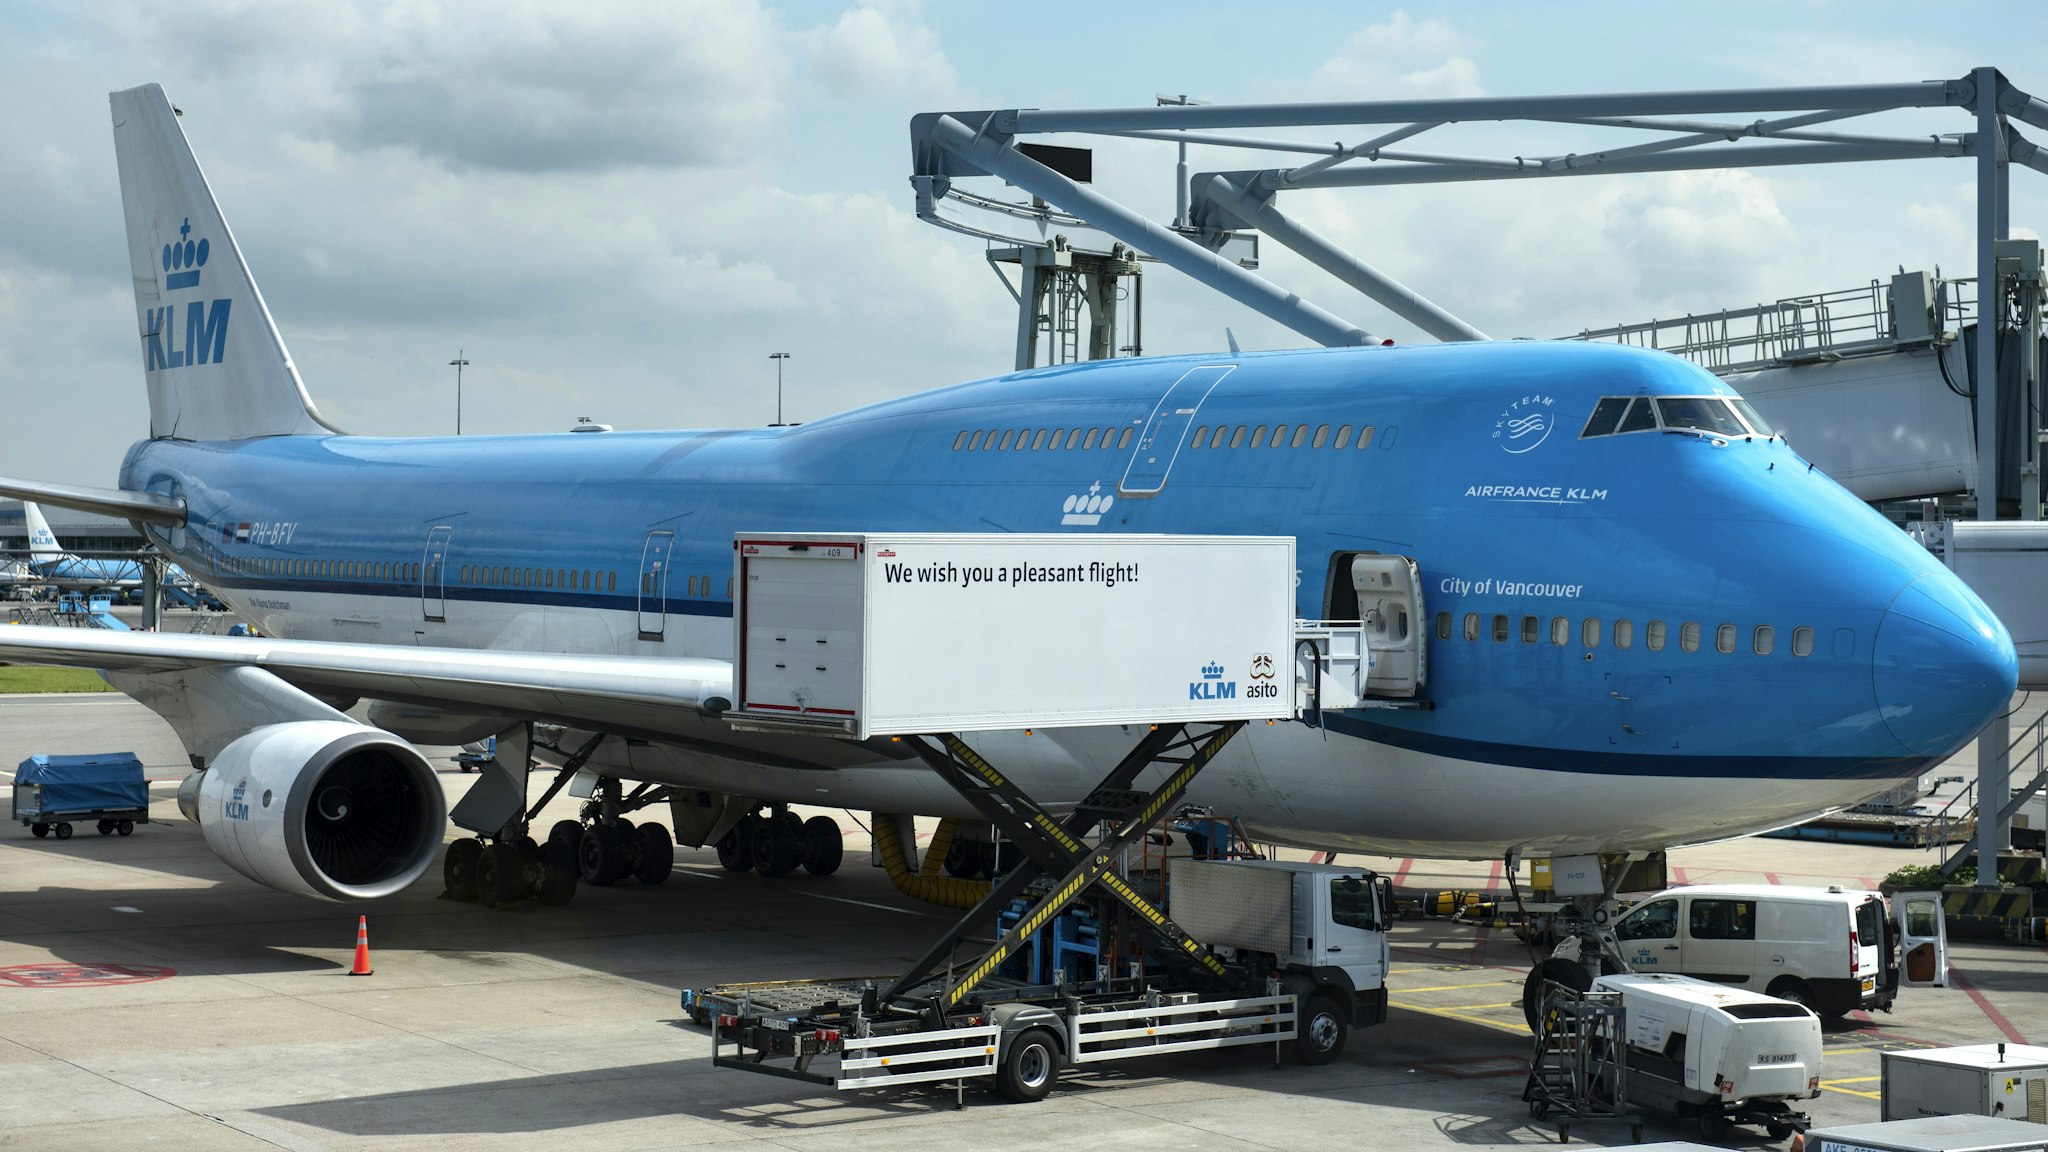 AMSTERDAM, NETHERLANDS - 2019/06/11: KLM Royal Dutch Airlines Boeing 747 plane seen at the Amsterdam Schiphol Airport runway. (Photo by Miguel Candela/SOPA Images/LightRocket via Getty Images)